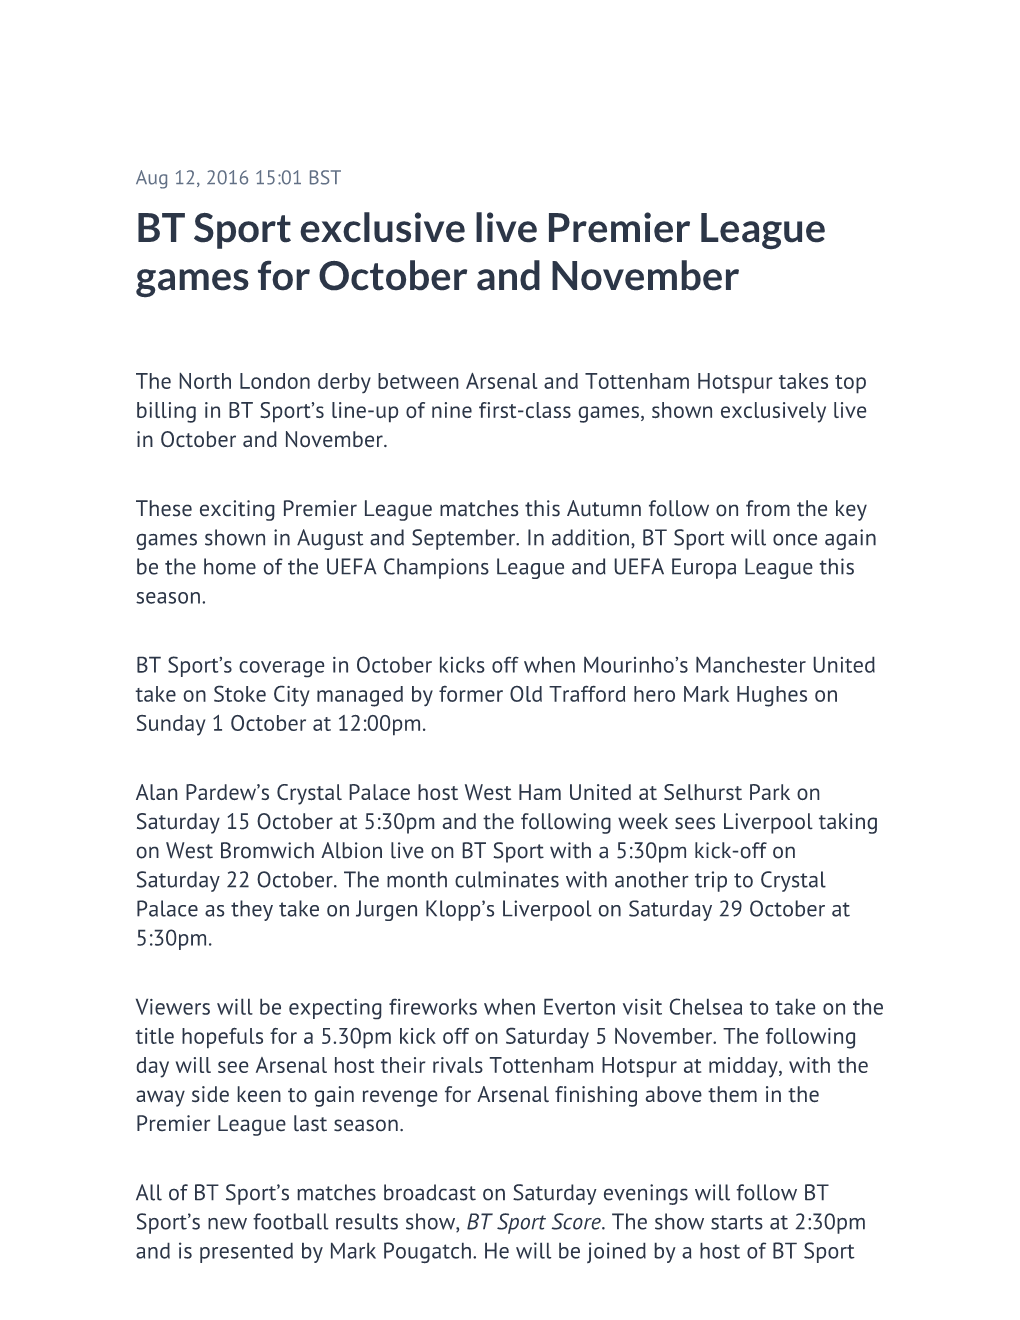 BT Sport Exclusive Live Premier League Games for October and November